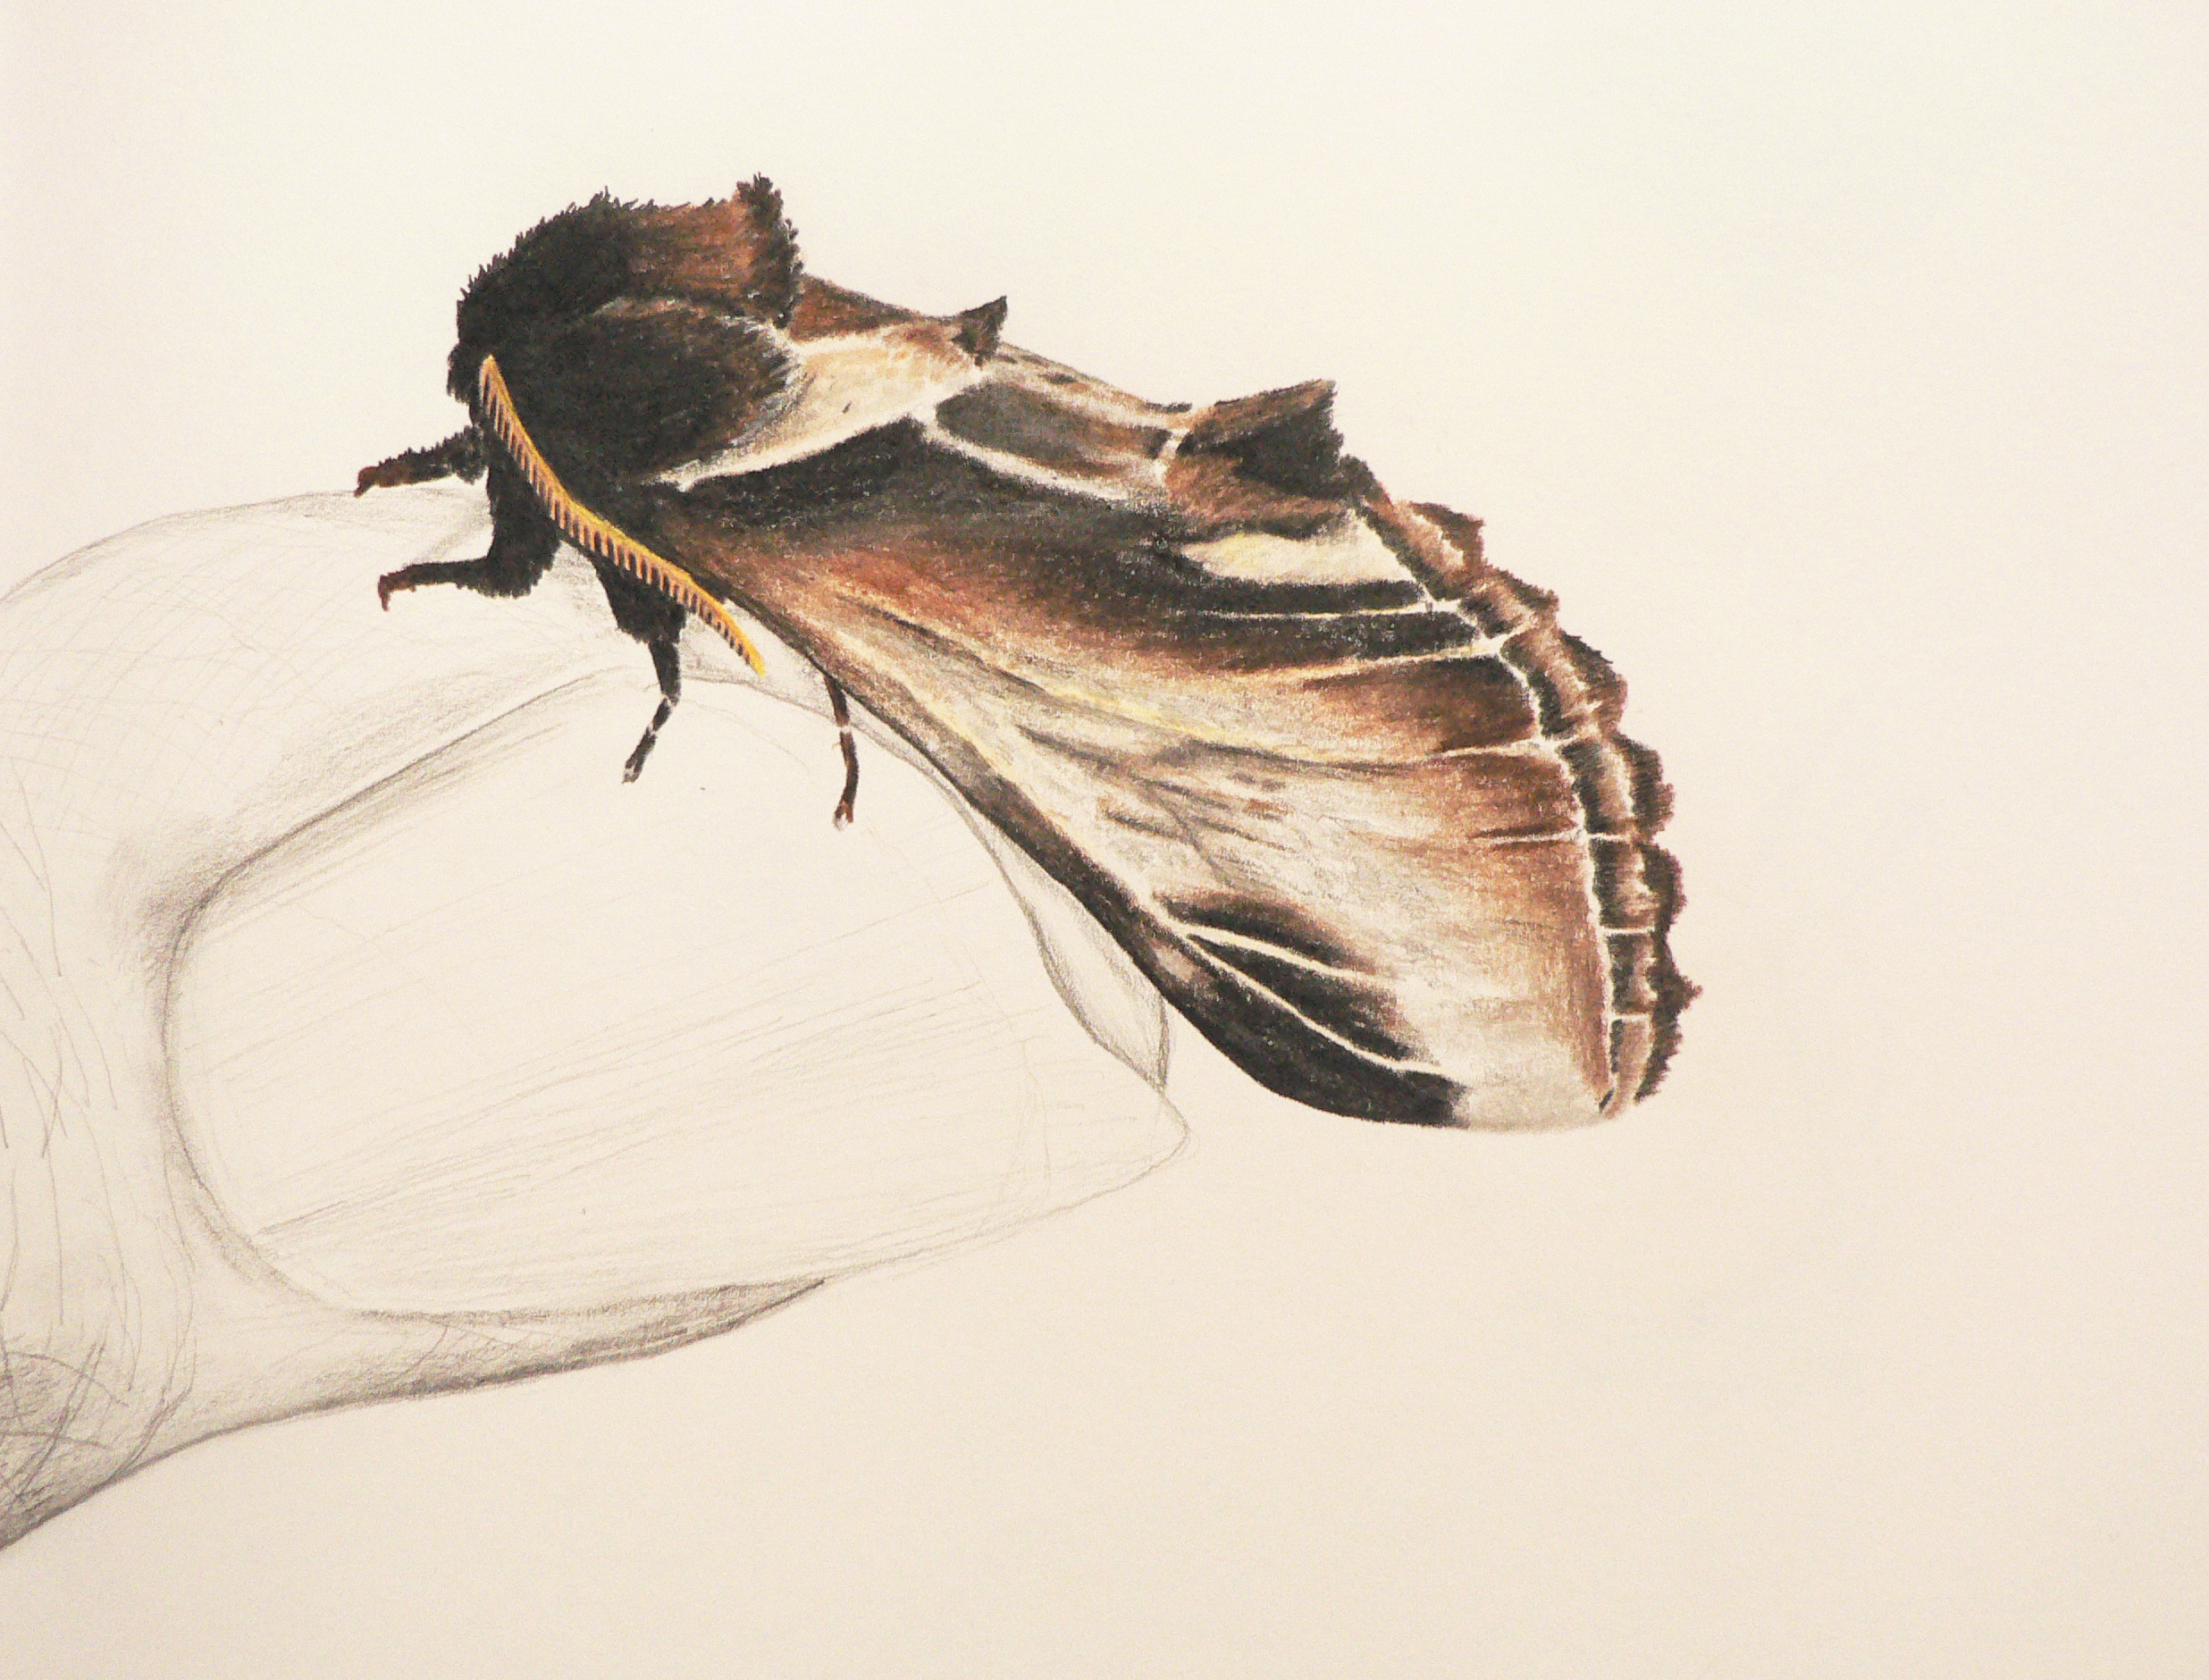 Swallow Prominent resting on a finger by Lola Clarke, 2nd place in 8-12 category, Insect Week 2022 art competition